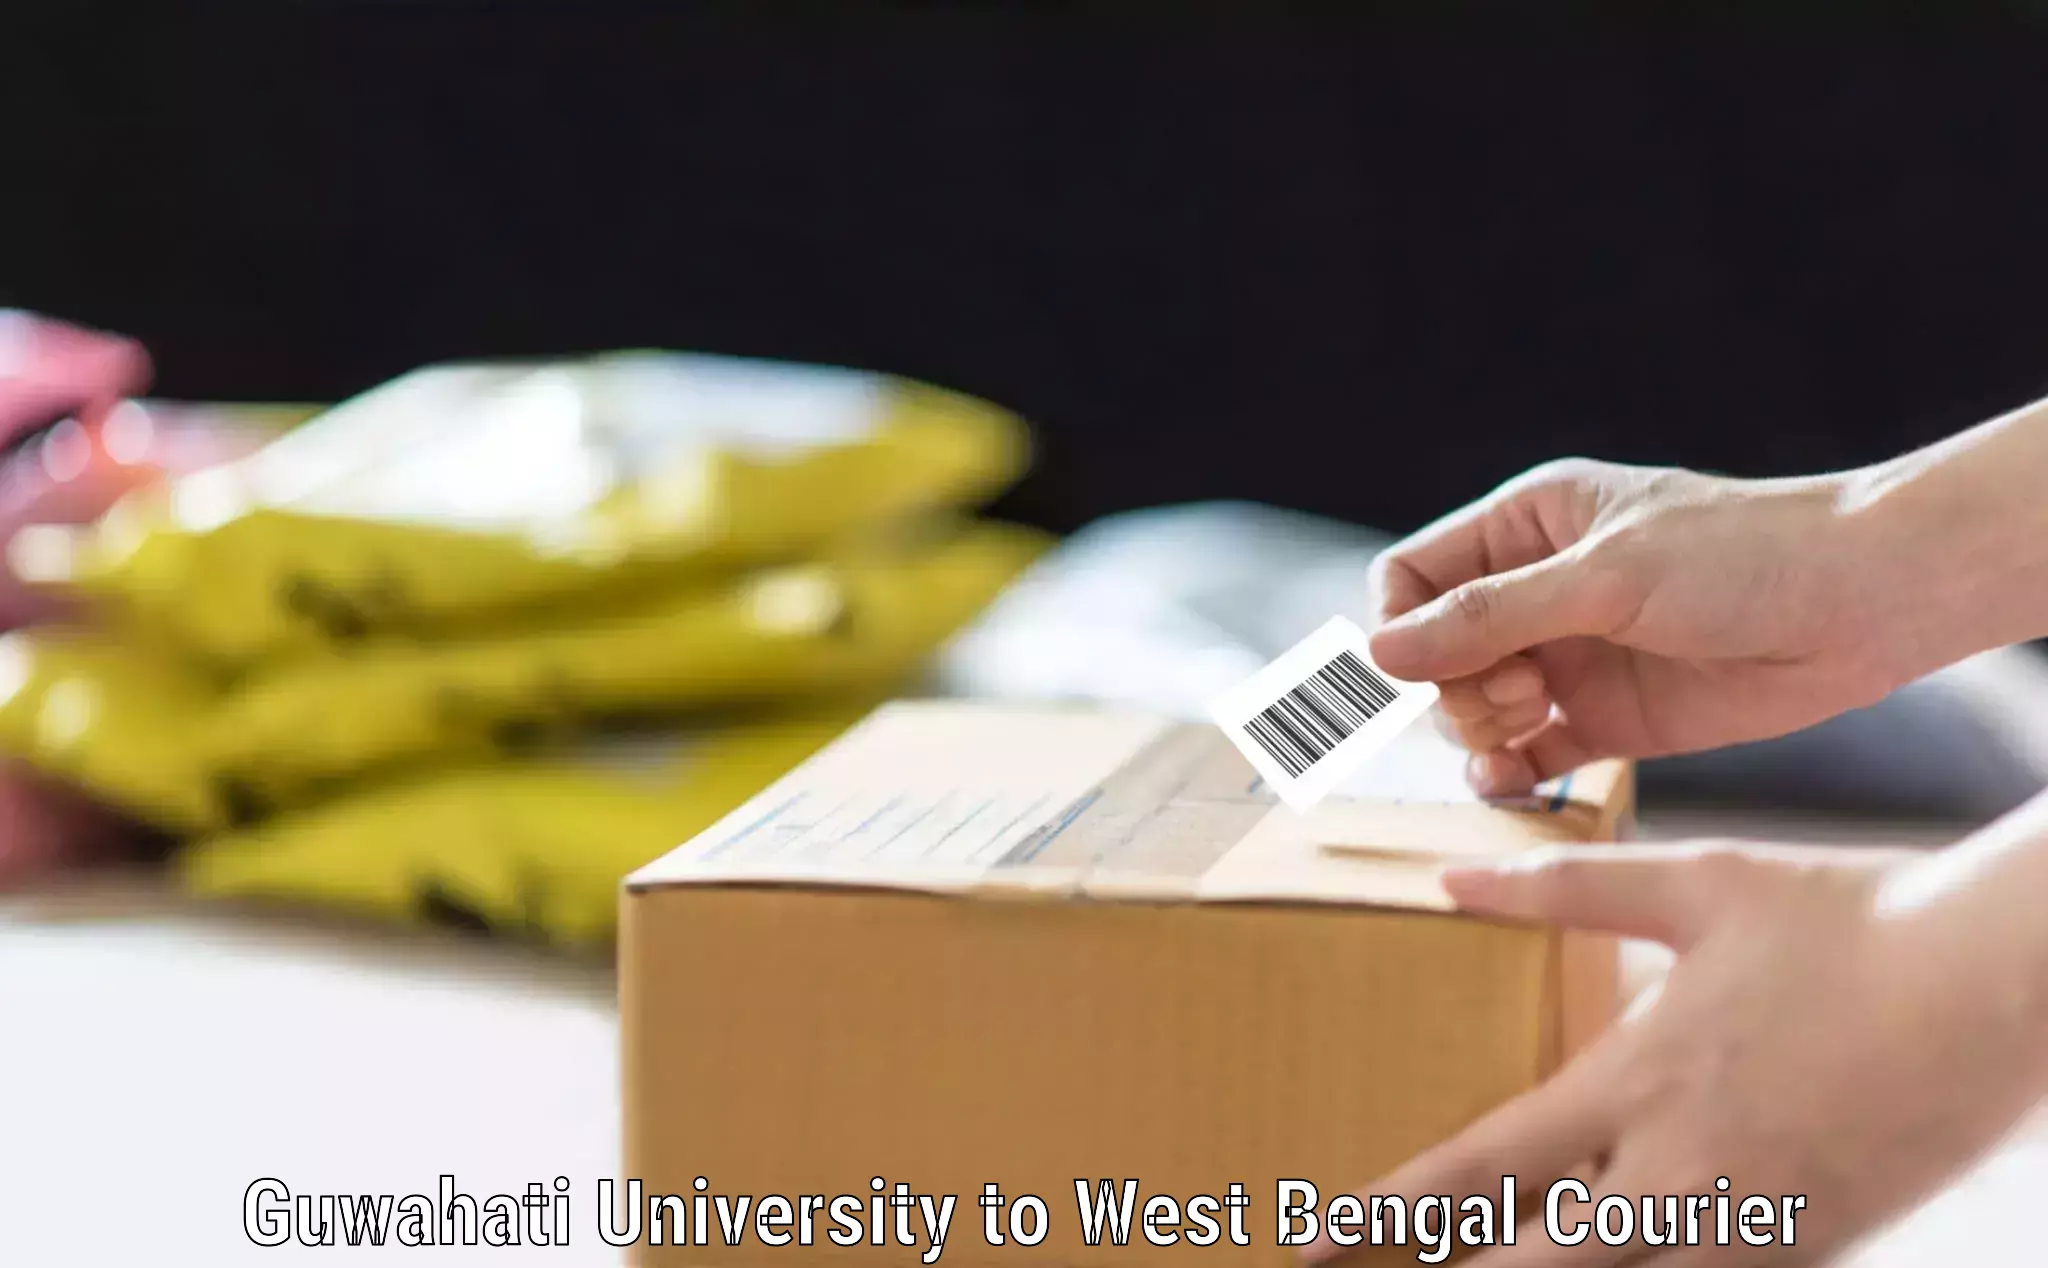 Online luggage shipping in Guwahati University to West Bengal